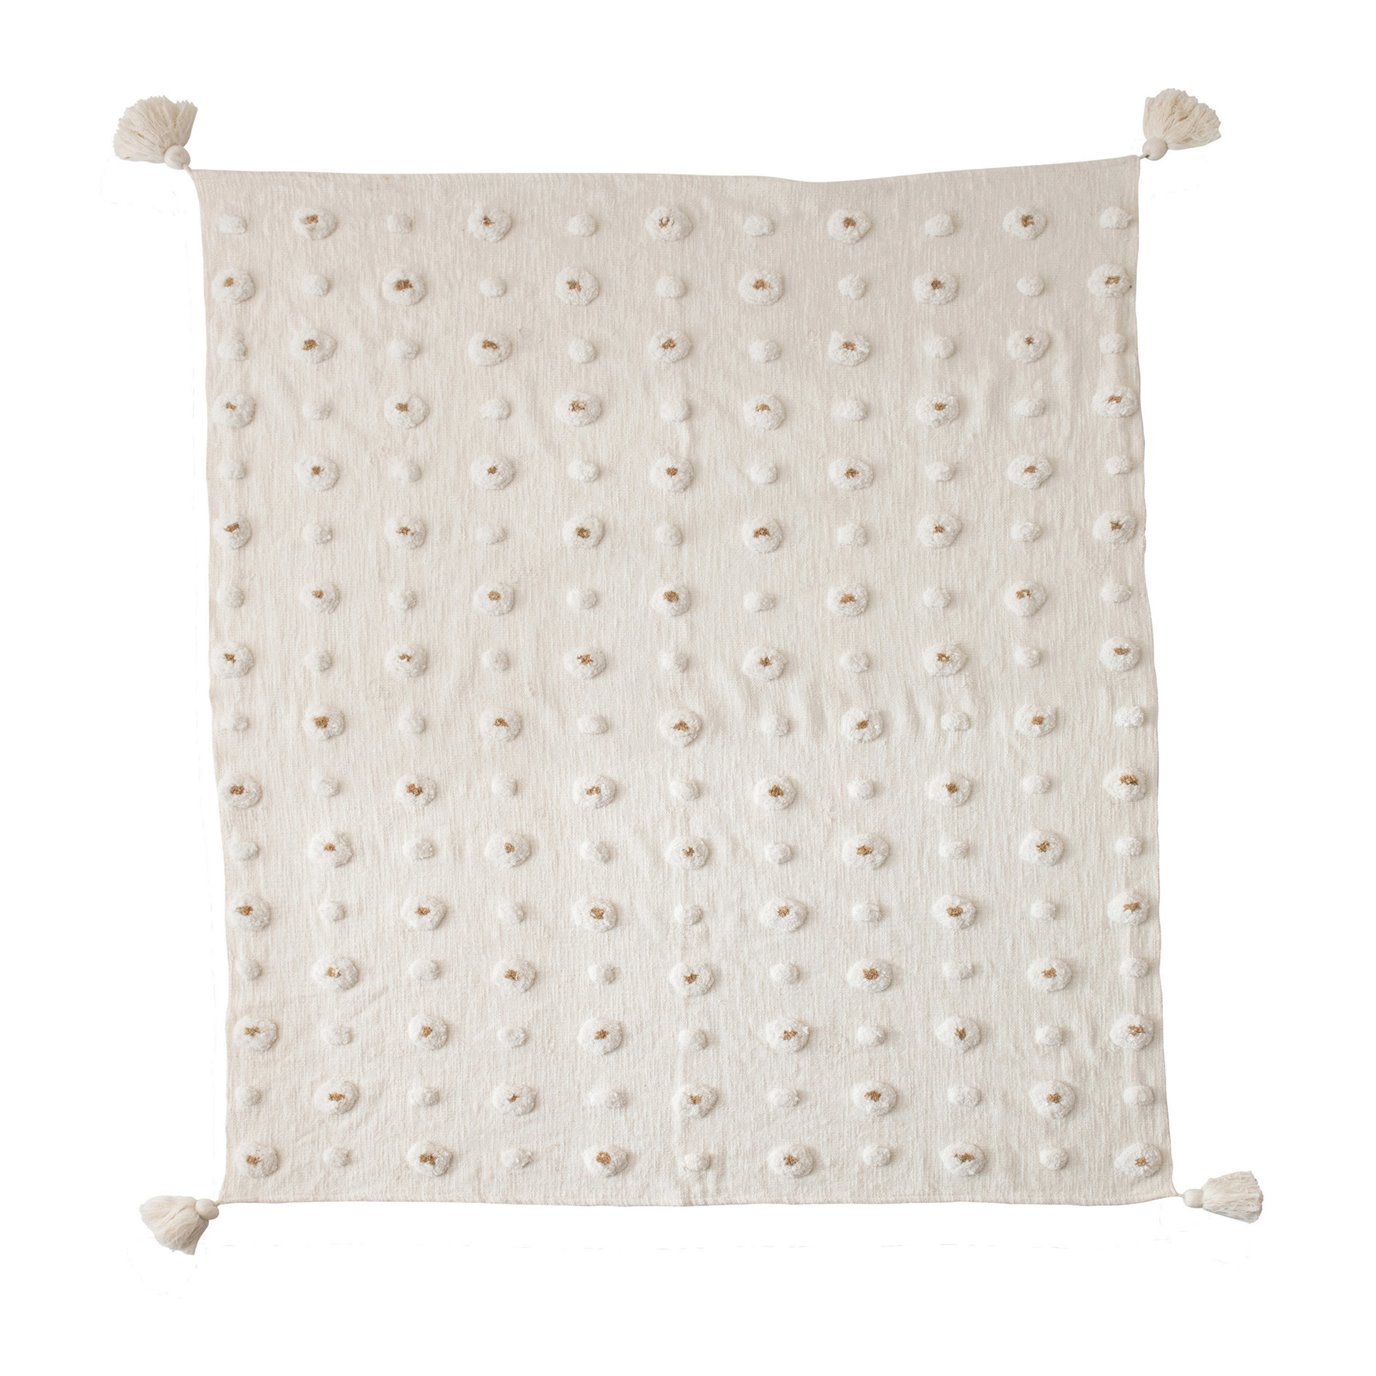 Cotton Tufted Throw with Tassels, White & Gold Color